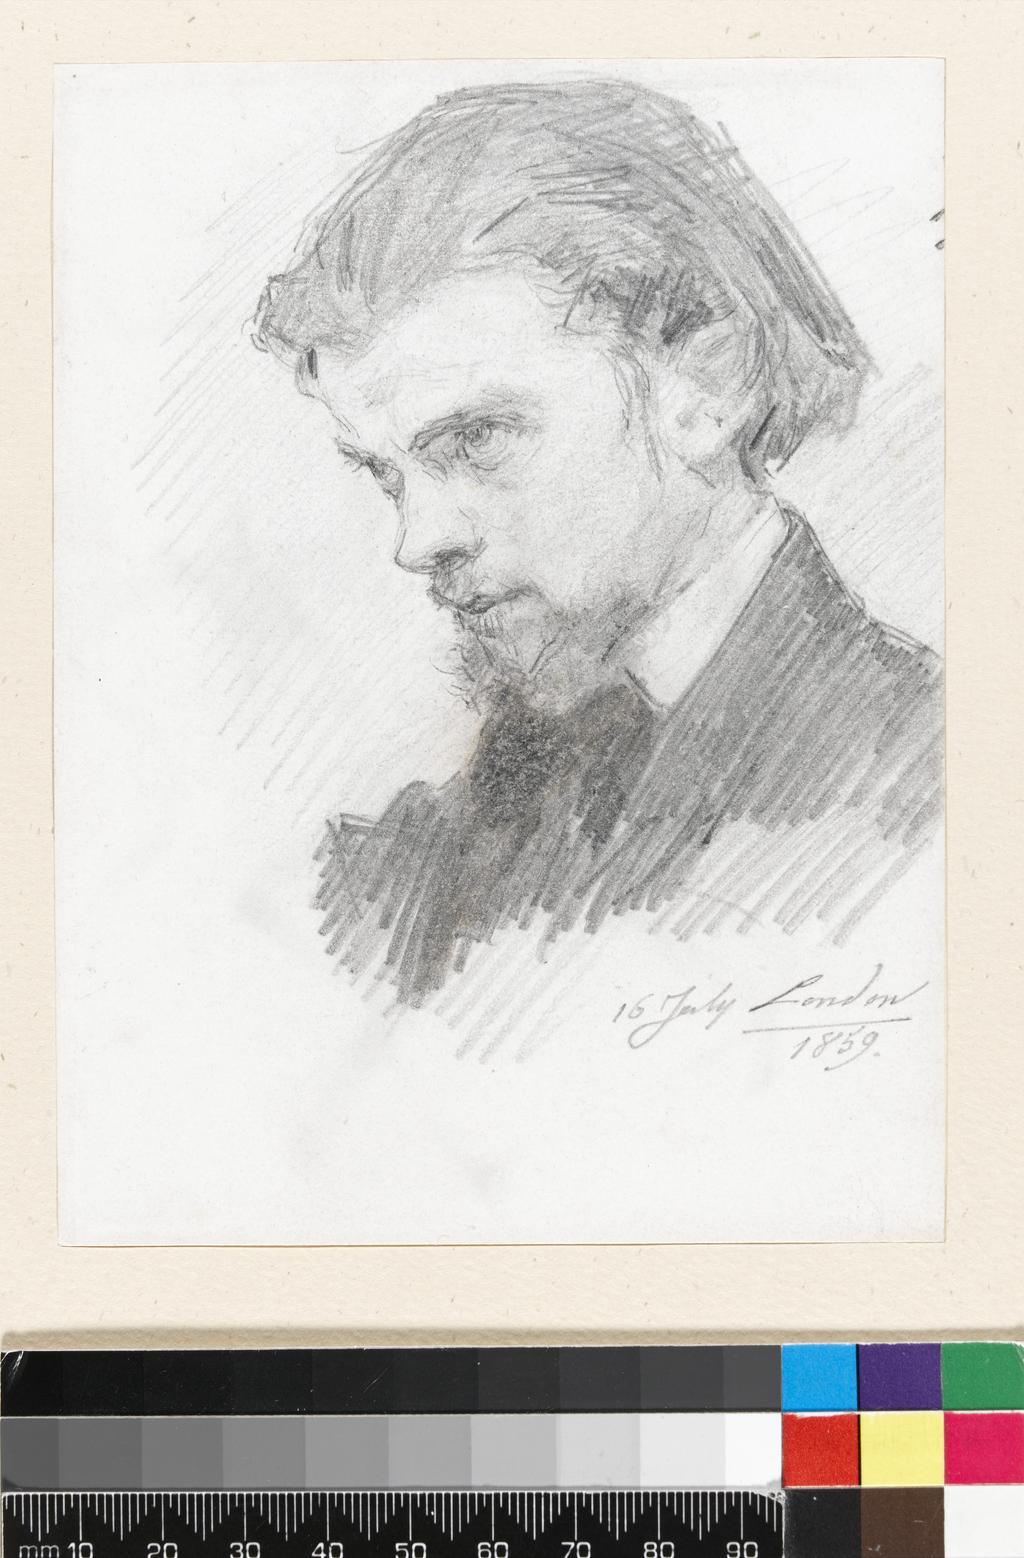 An image of Self-Portrait. Fantin-Latour, Henri (French, 1836-1904). Graphite on paper, height 144 mm, width 109 mm, 1859.